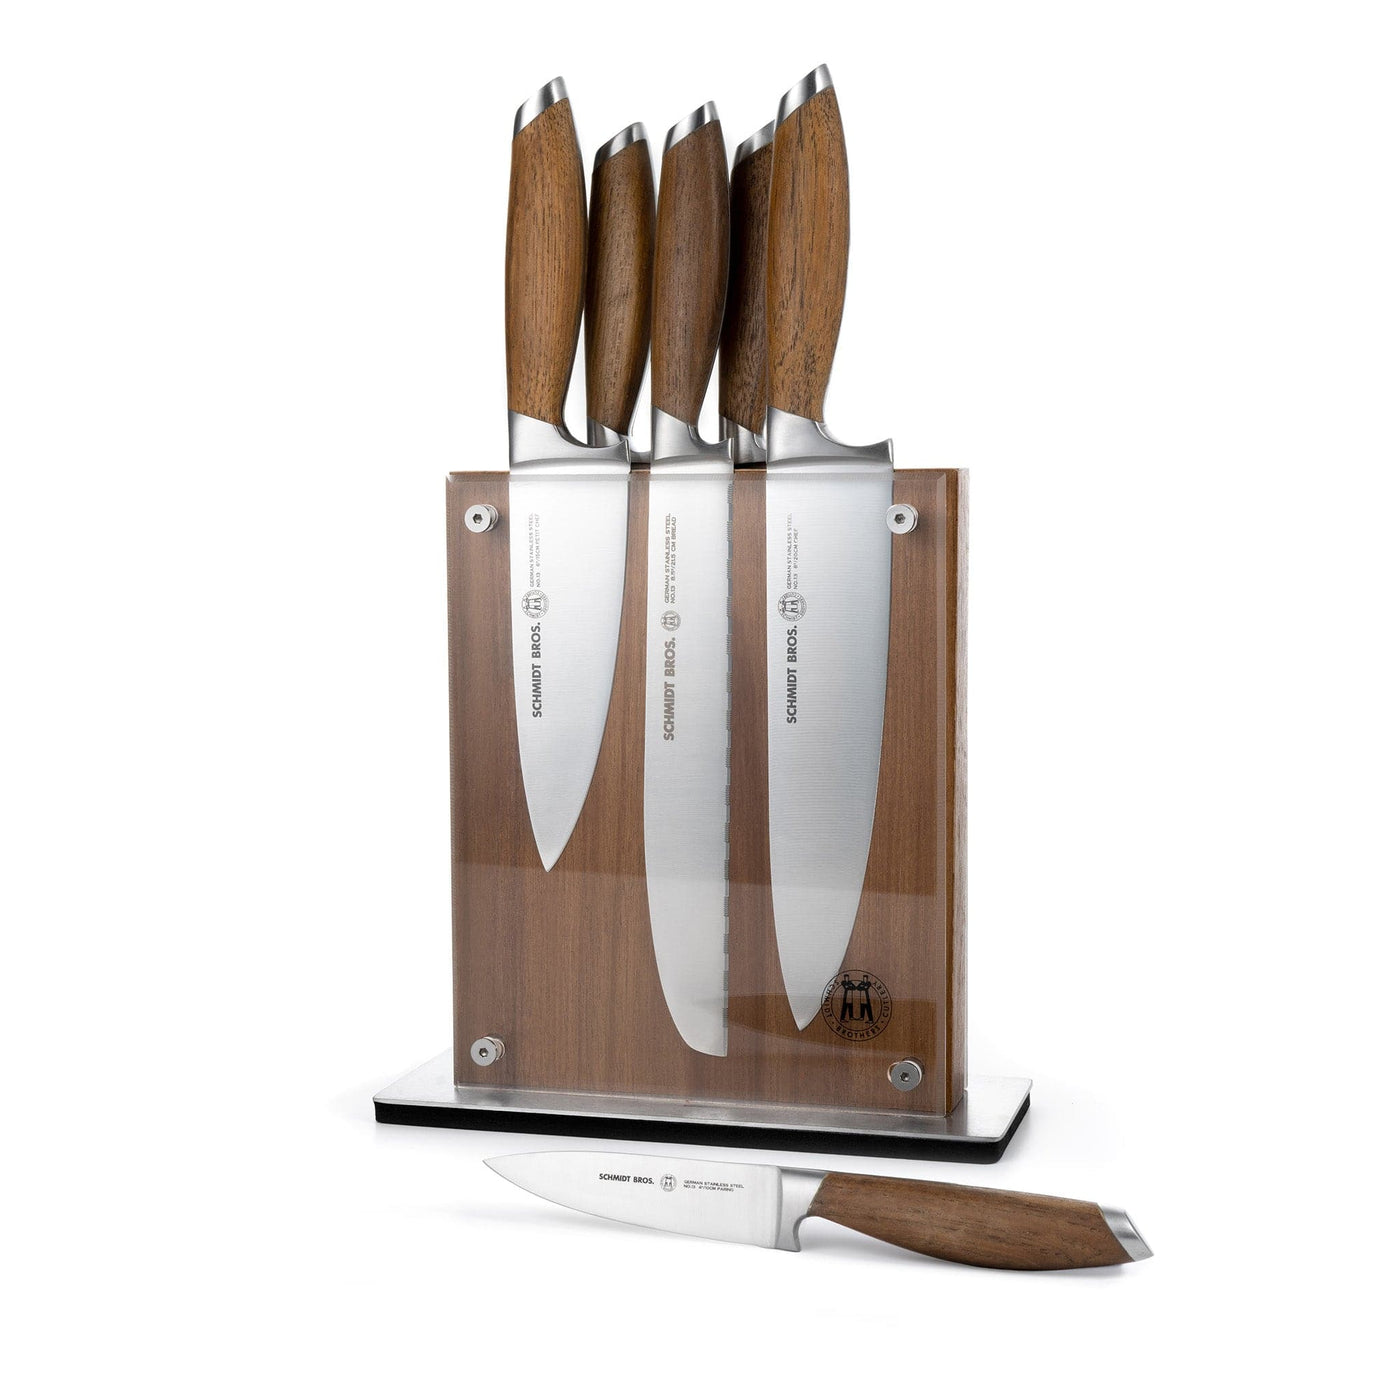 https://schmidtbrothers.com/cdn/shop/files/schmidt-brothers-kitchen-cutlery-schmidt-brothers-bonded-teak-7-piece-knife-set-high-carbon-stainless-steel-cutlery-with-acacia-and-acrylic-magnetic-knife-block-30743406936125_1400x.jpg?v=1684152455